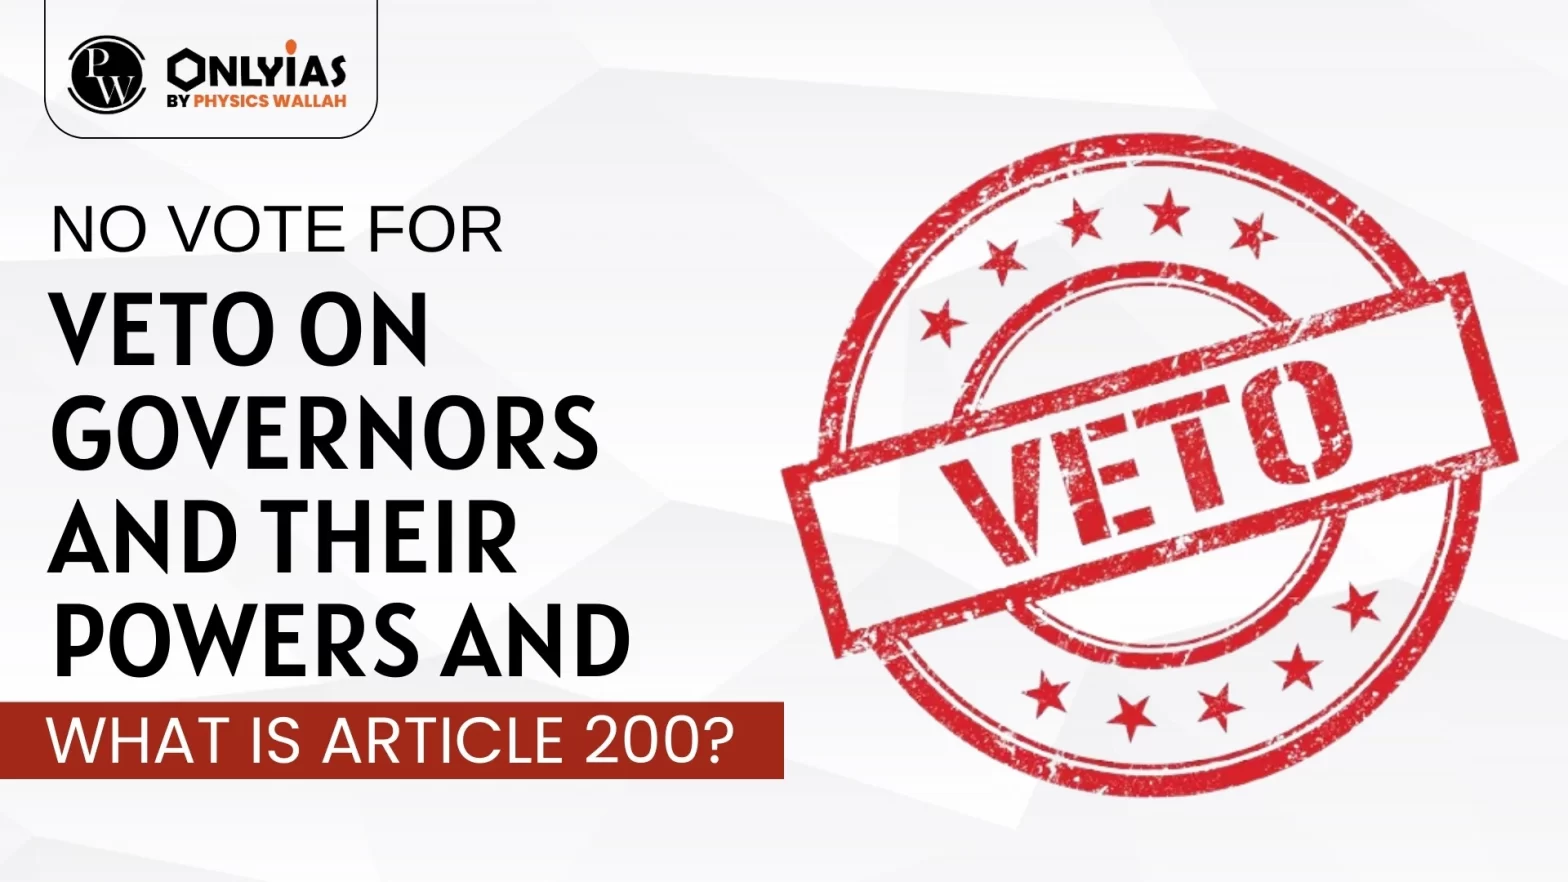 No Vote For Veto: On Governors And Their Powers and What is Article 200?